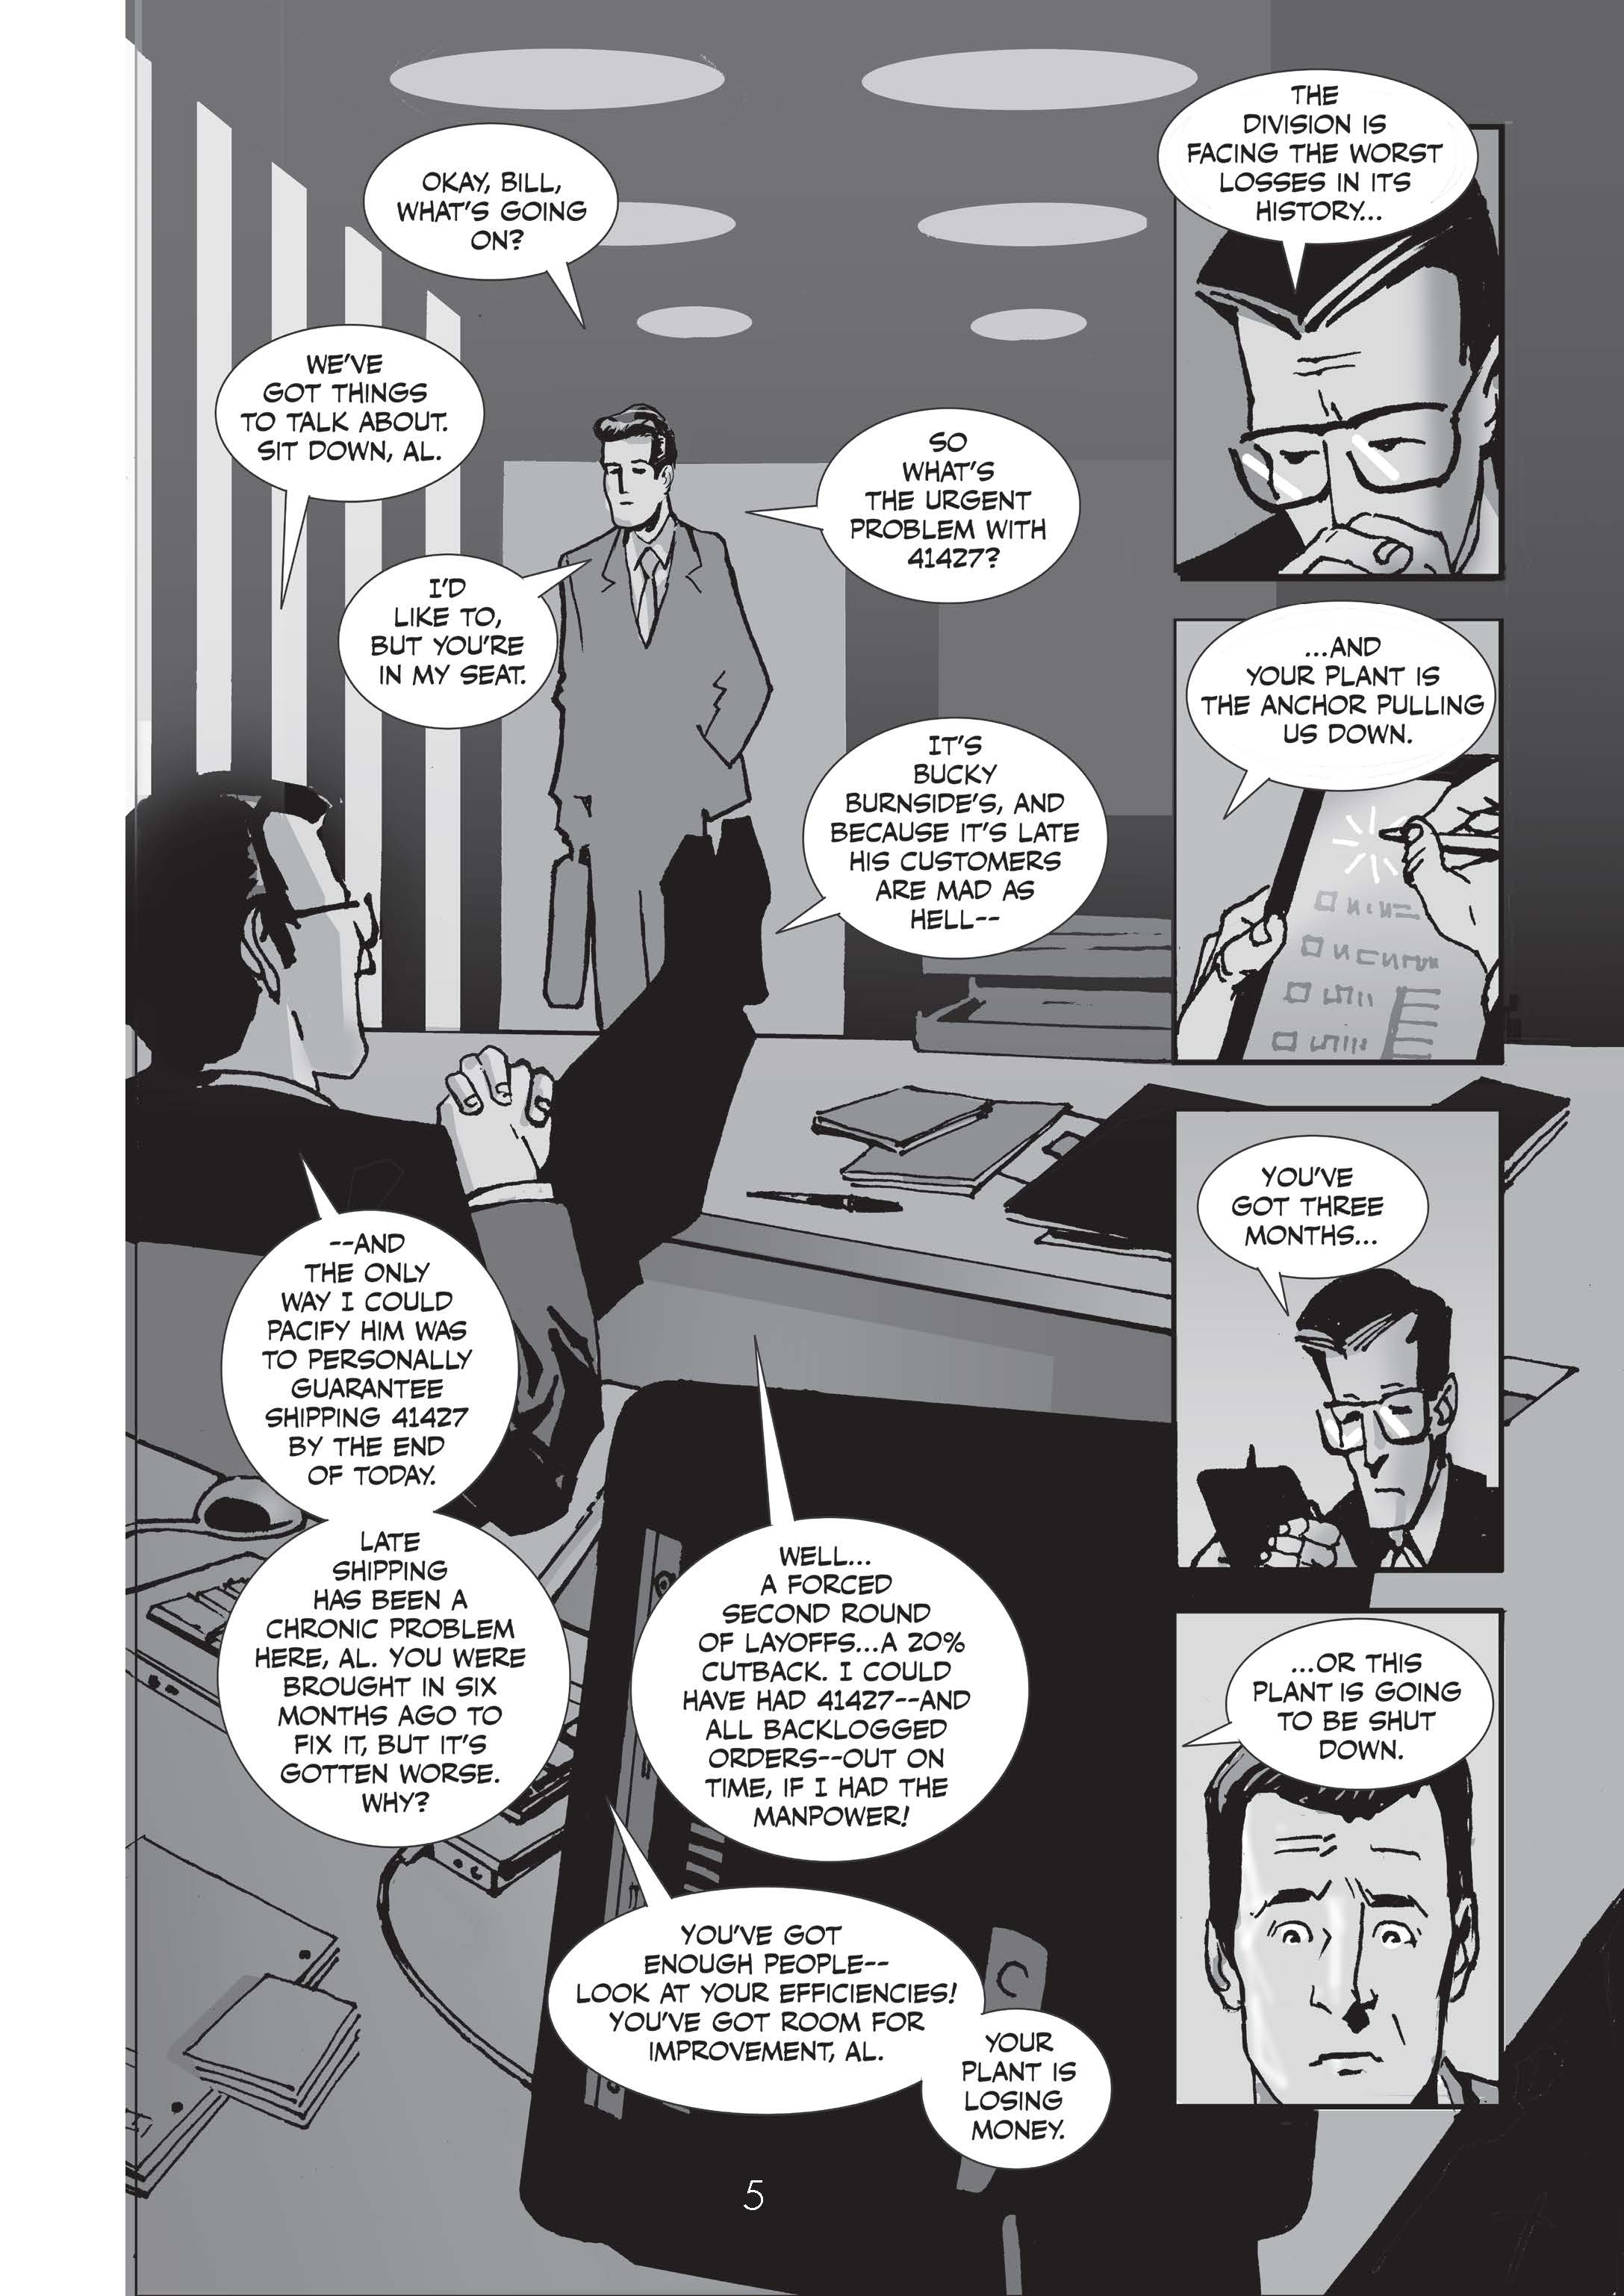 Excerpt from The Goal: A Business Graphic Novel – The North River Press